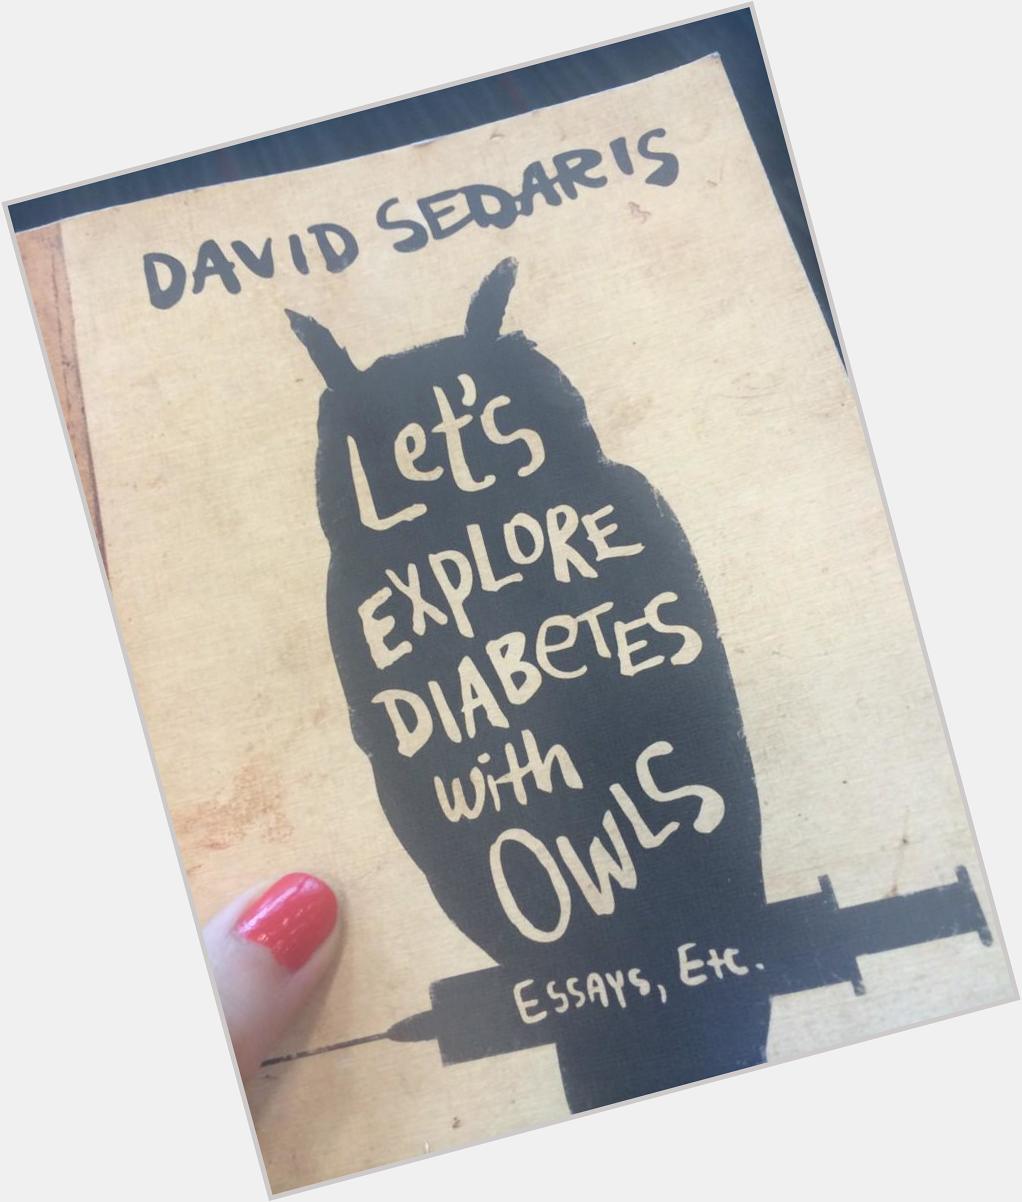 Ironic that I\m all up in this today. Happy Birthday David Sedaris. Thanks for words that never leave me lonely. 